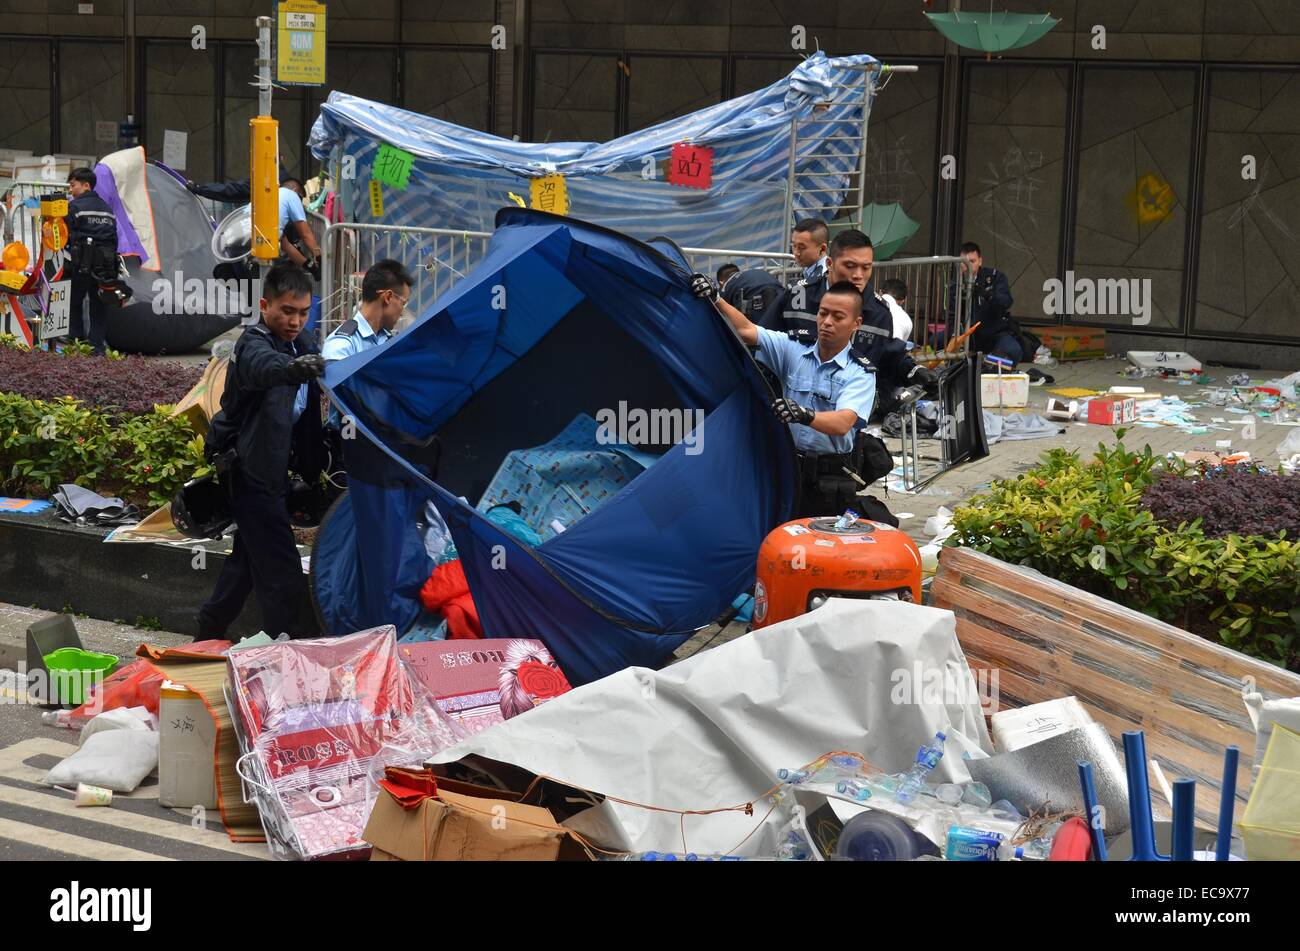 Hong Kong, China. 11th December, 2014. After 74 days of the Occupy Hong Kong protest, police enact a court injunction to remove protesters and their encampment from Connaught Road Central. The authorities had warned protesters to leave in advance of the clearance, but a few pro-democracy demonstrators remained, leading to a handful of arrests. Credit:  Stefan Irvine/Alamy Live News Stock Photo